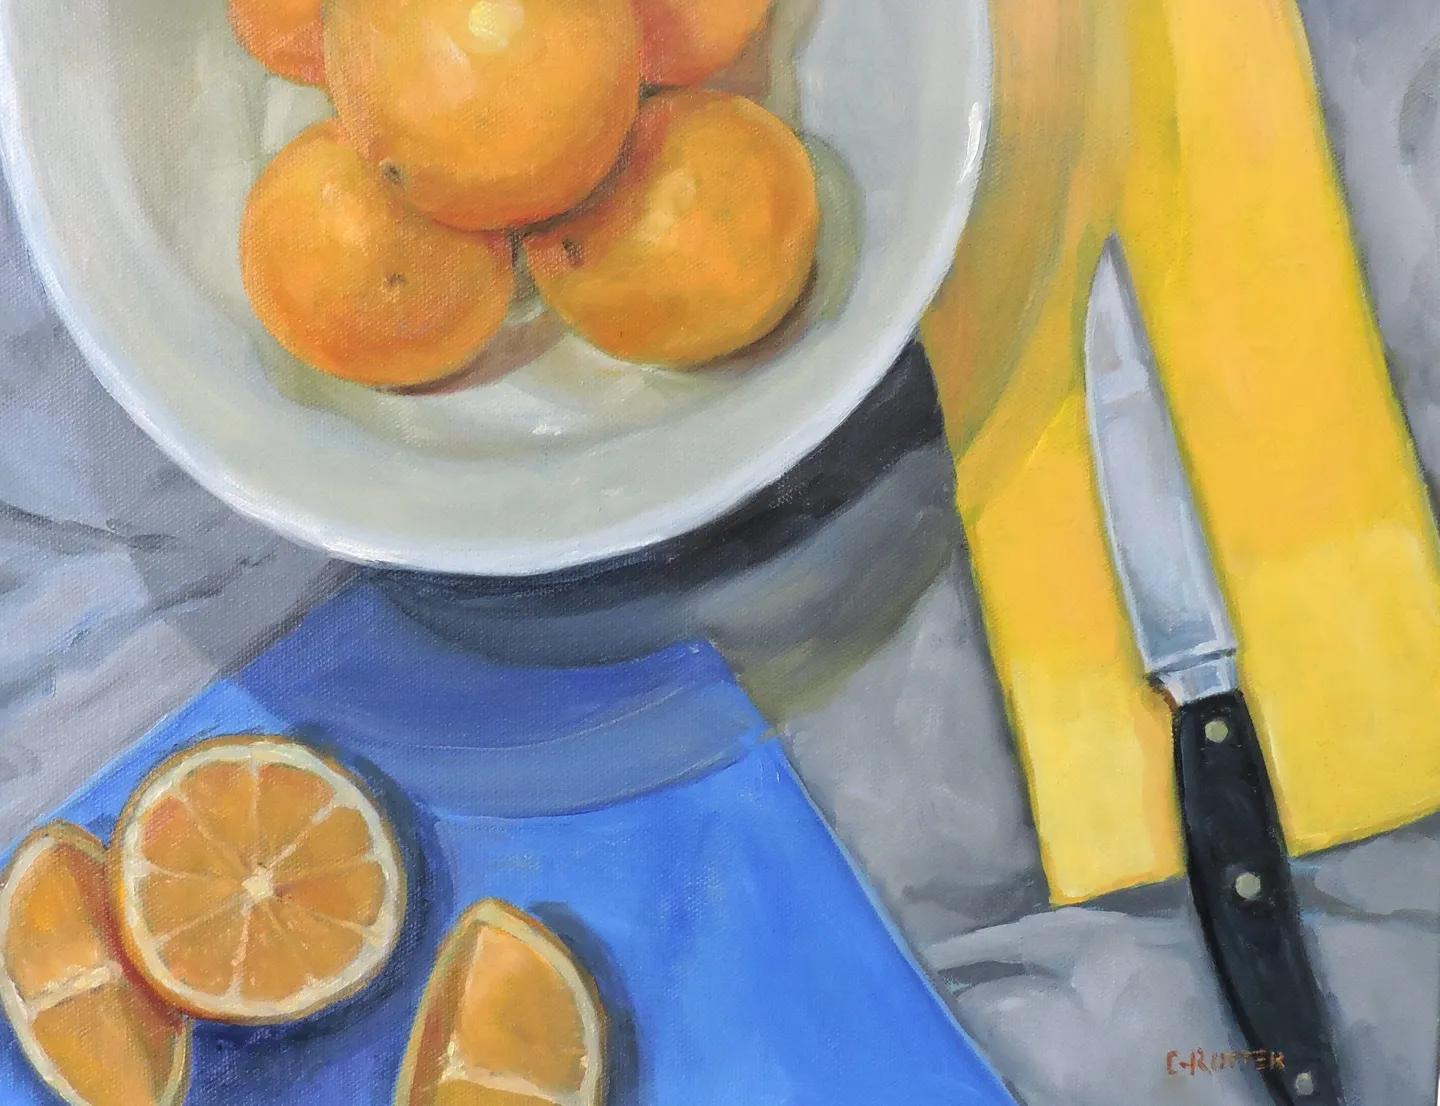 A painting of oranges in a plate